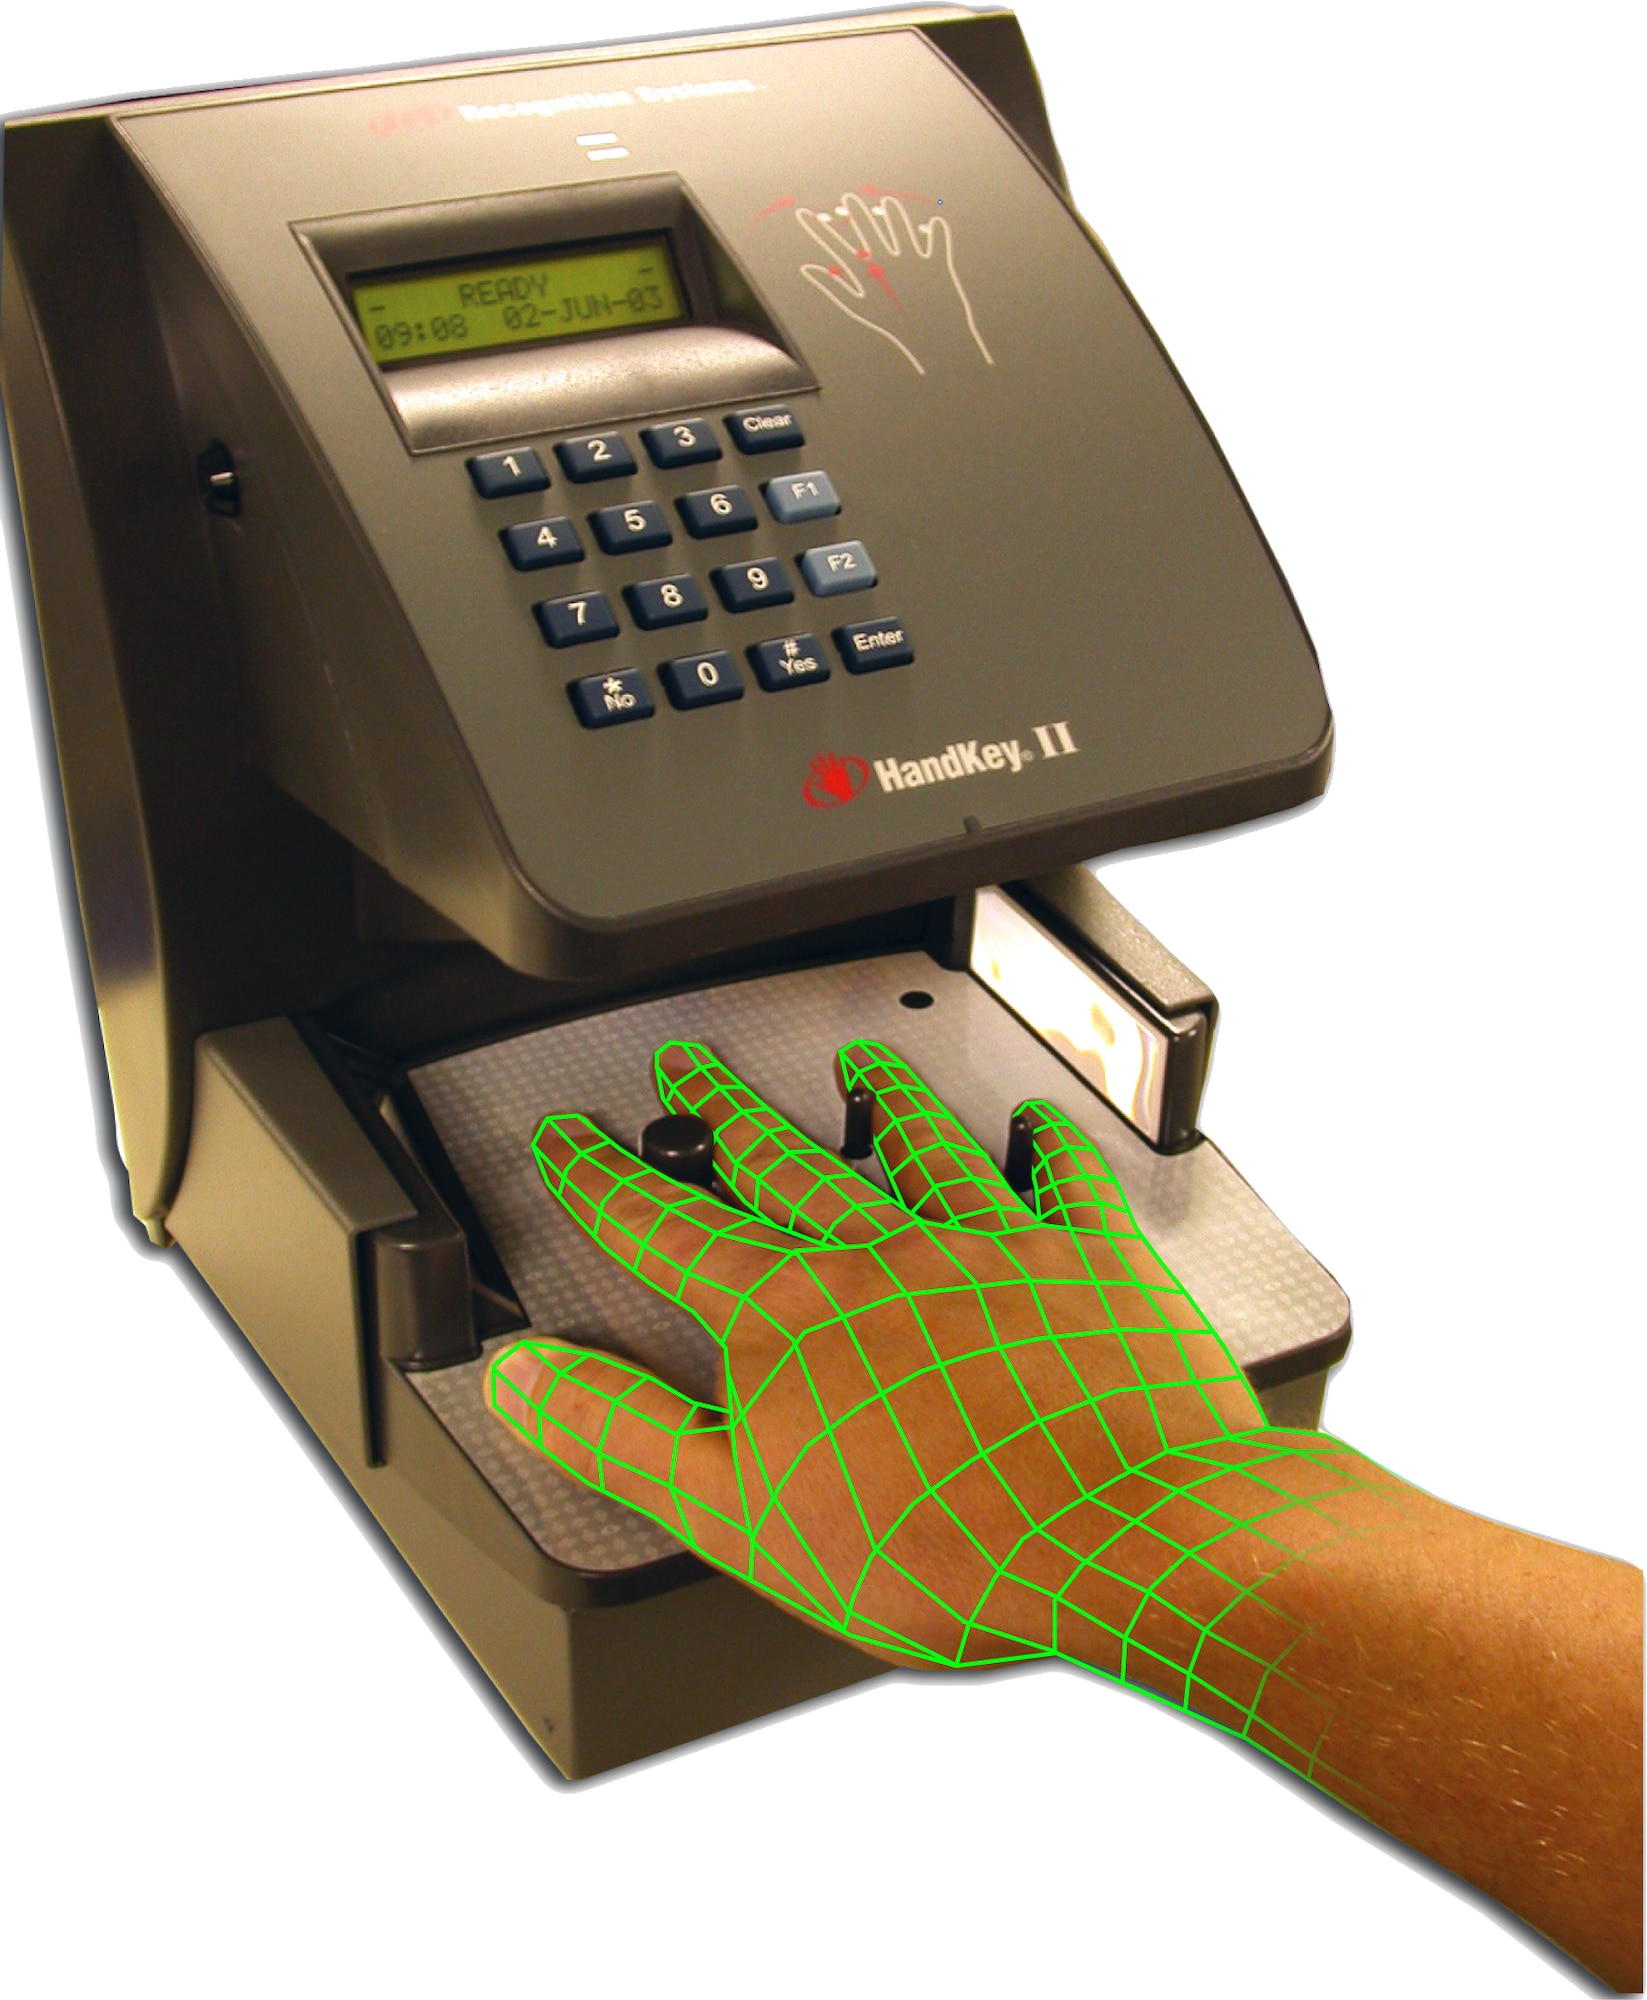 PHOTO ILLUSTRATION -- Privacy is not an issue with the hand scanner.  The scanner senses the geometric shape of the hand, not the fingerprints.  (Photo illustration by Staff Sgt. K.D. Williams)